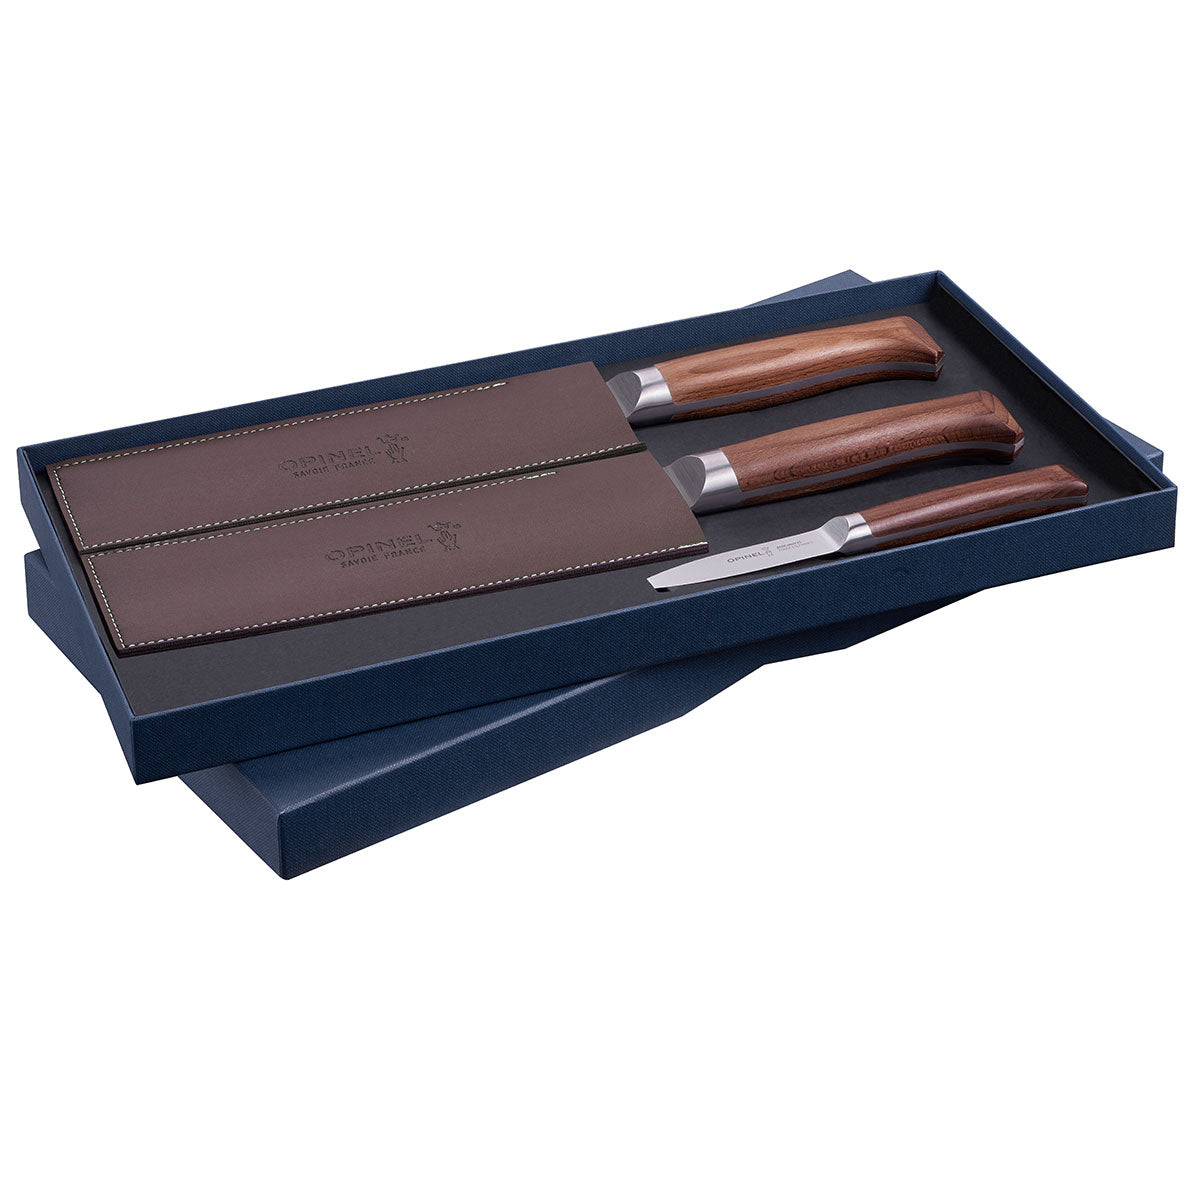 OPINEL Les Forges 1890 3pc Set (Chef, Carving, Paring)